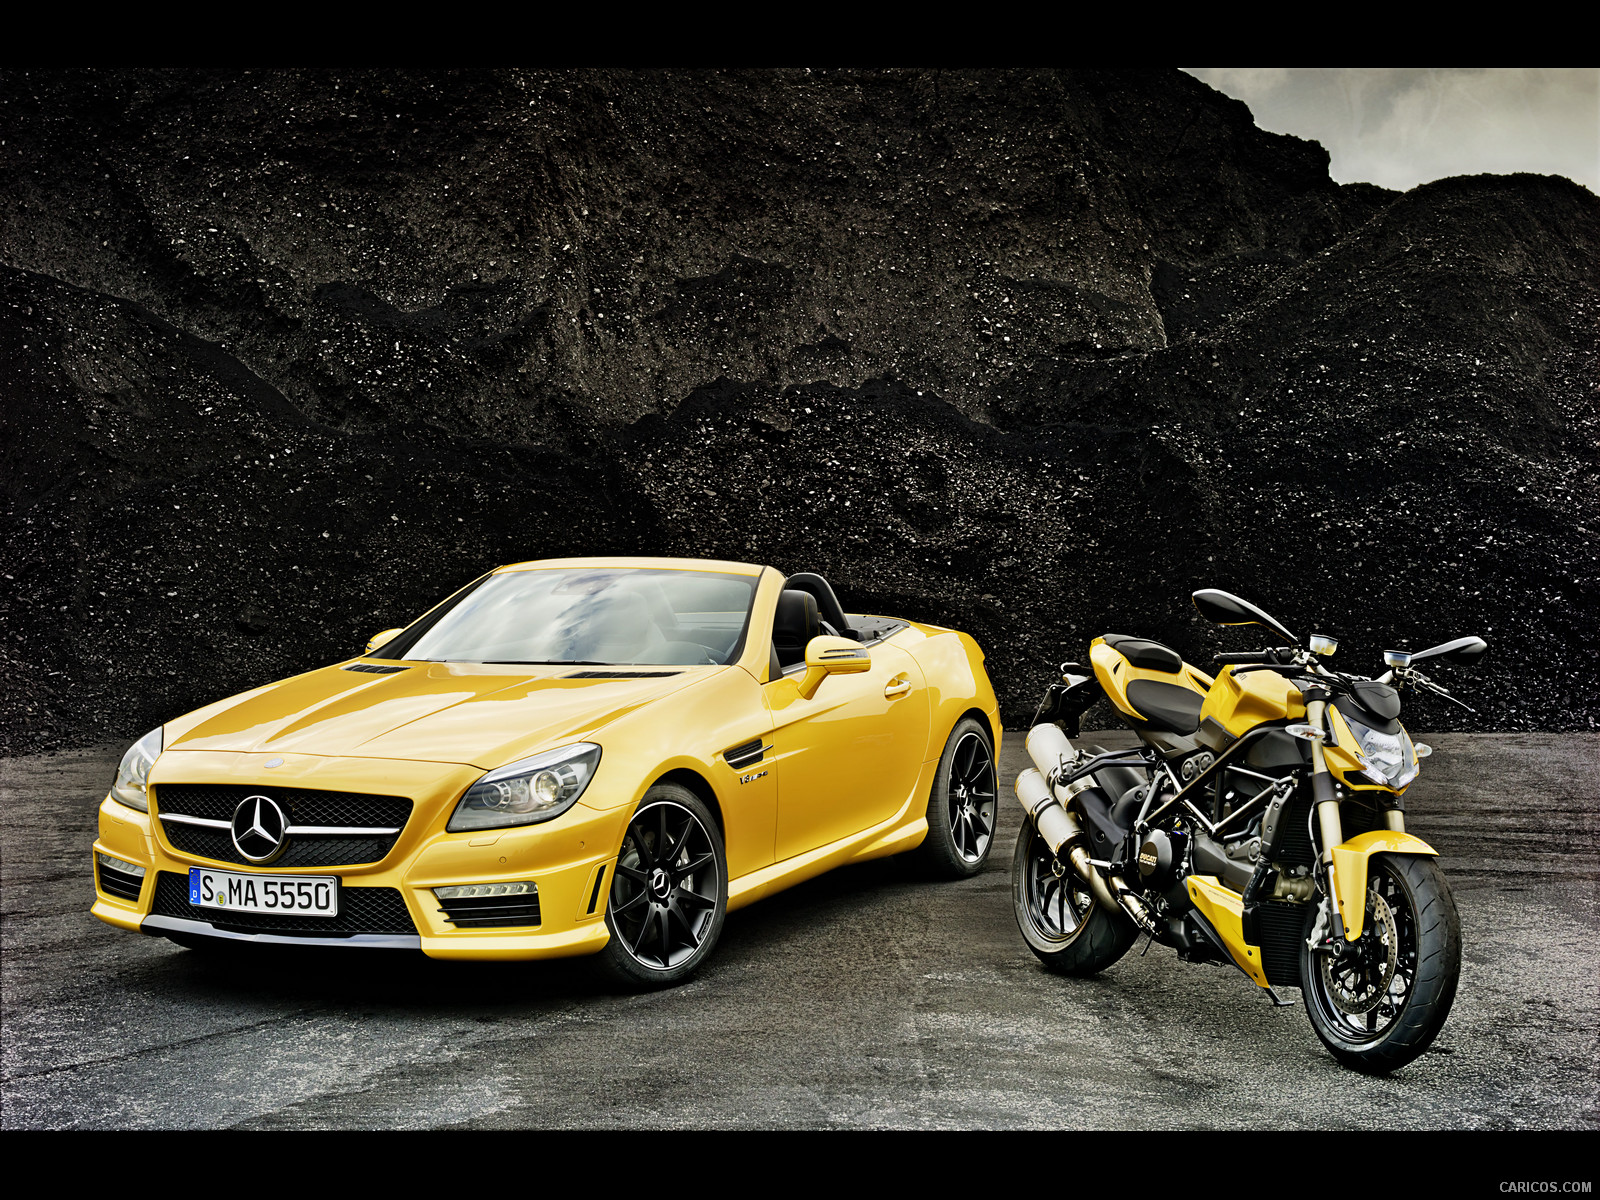 Mercedes-Benz SLK 55 AMG and Ducati Streetfighter 848 - , #44 of 47